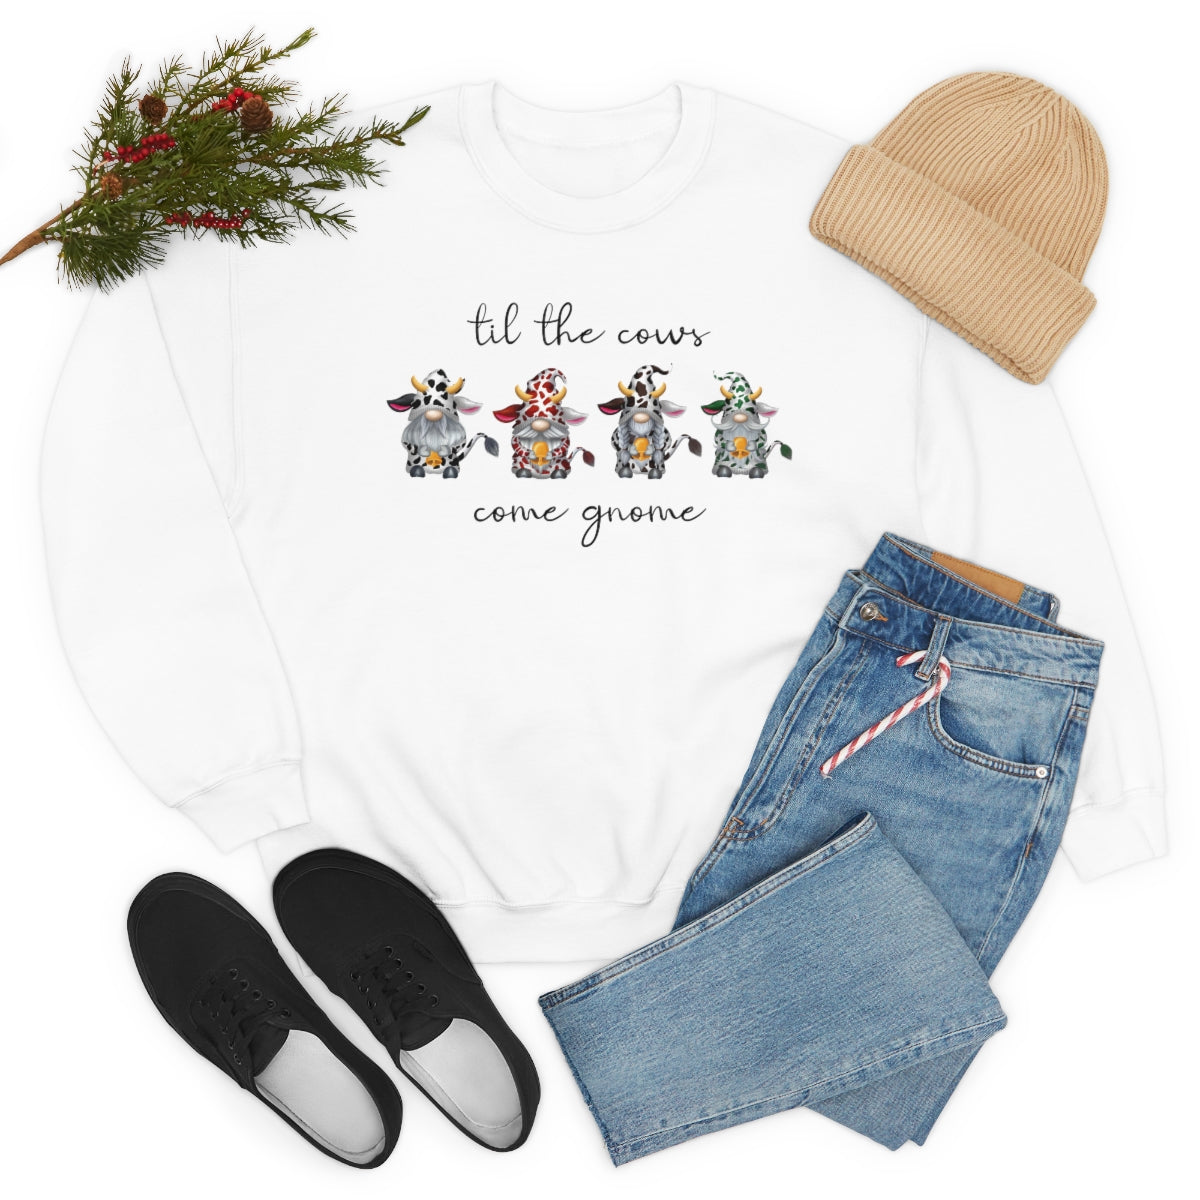 Til The Cows Come Gnome Sweatshirt for Women and Teens, Funny Gnome Gifts featuring Gnomes in Cowprint Sweaters